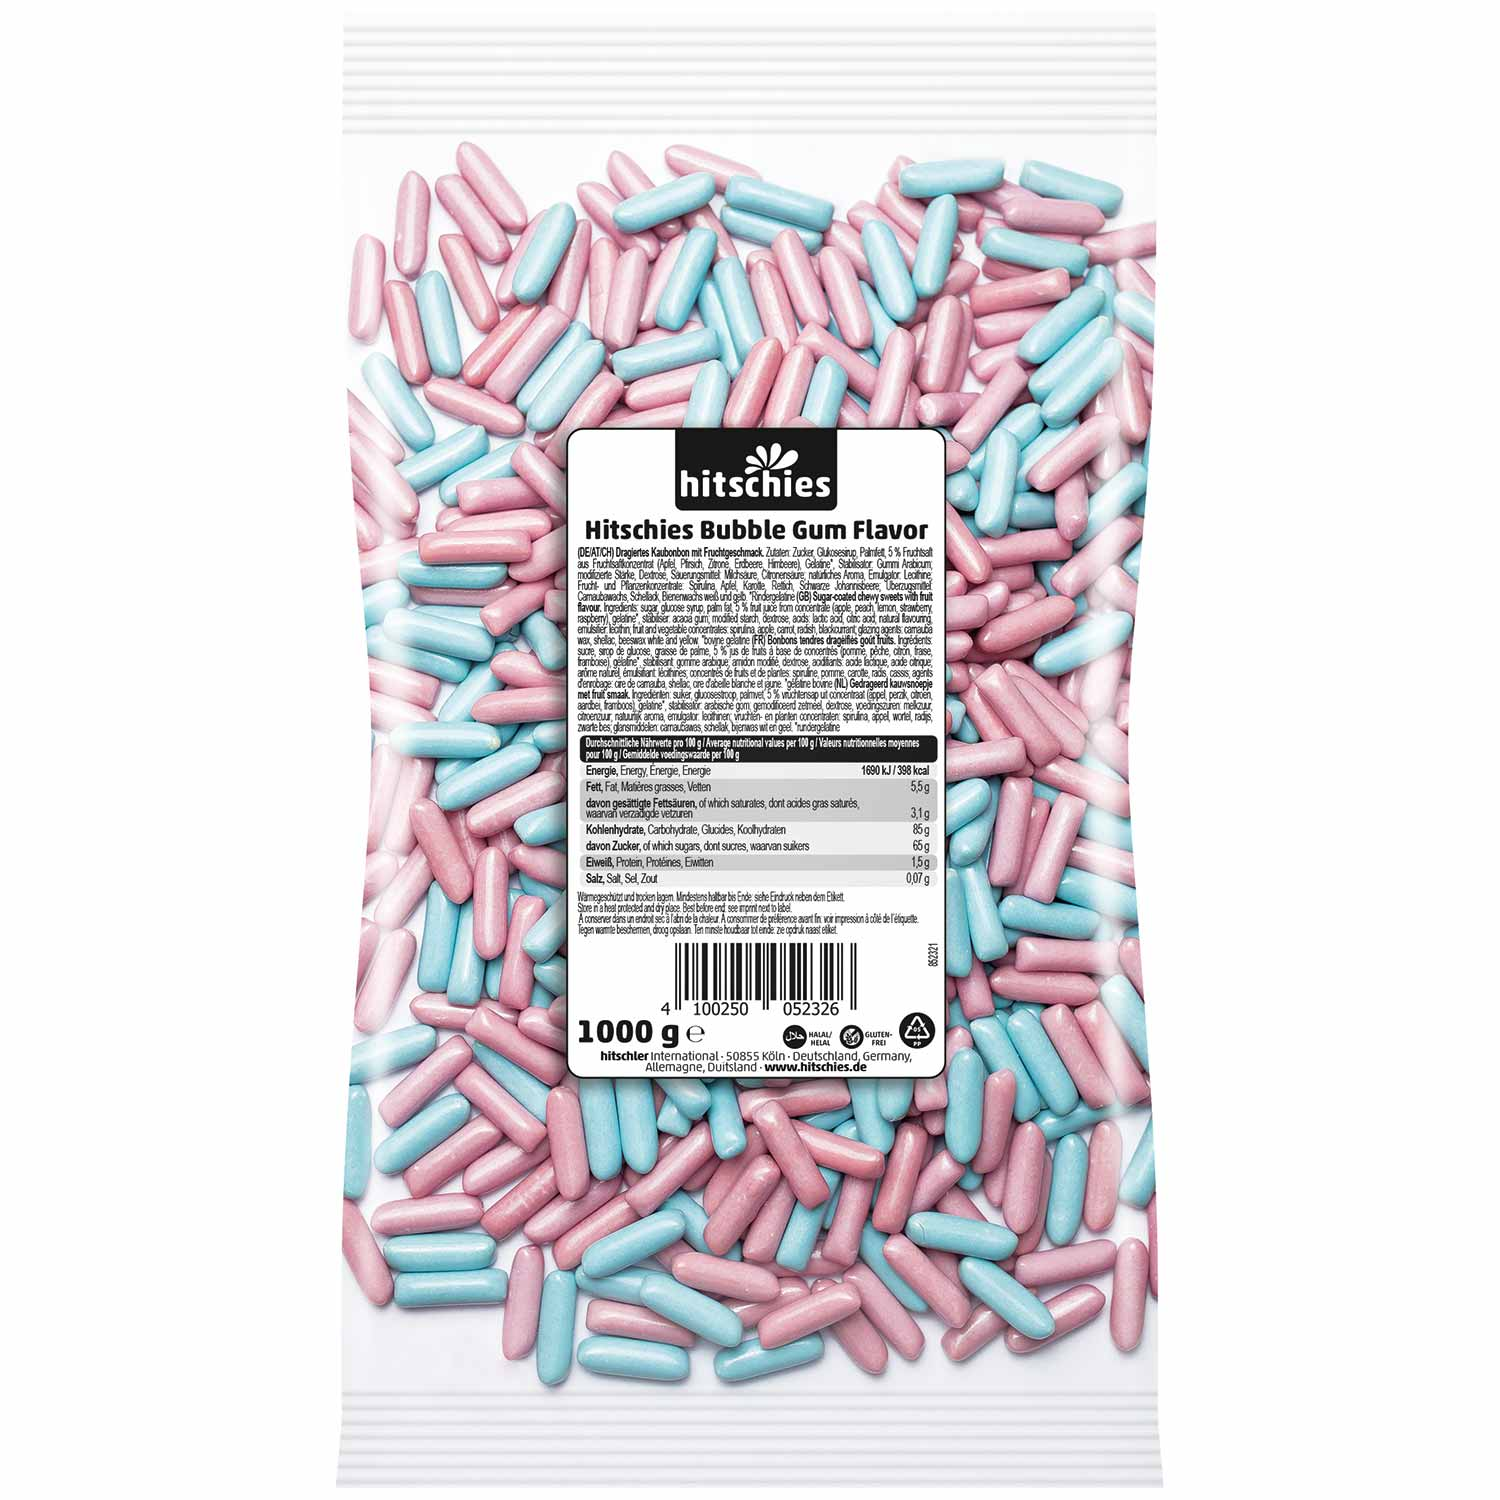 hitschies Chewing Candy Bubble Gum Flavor 1kg / 2.2lbs